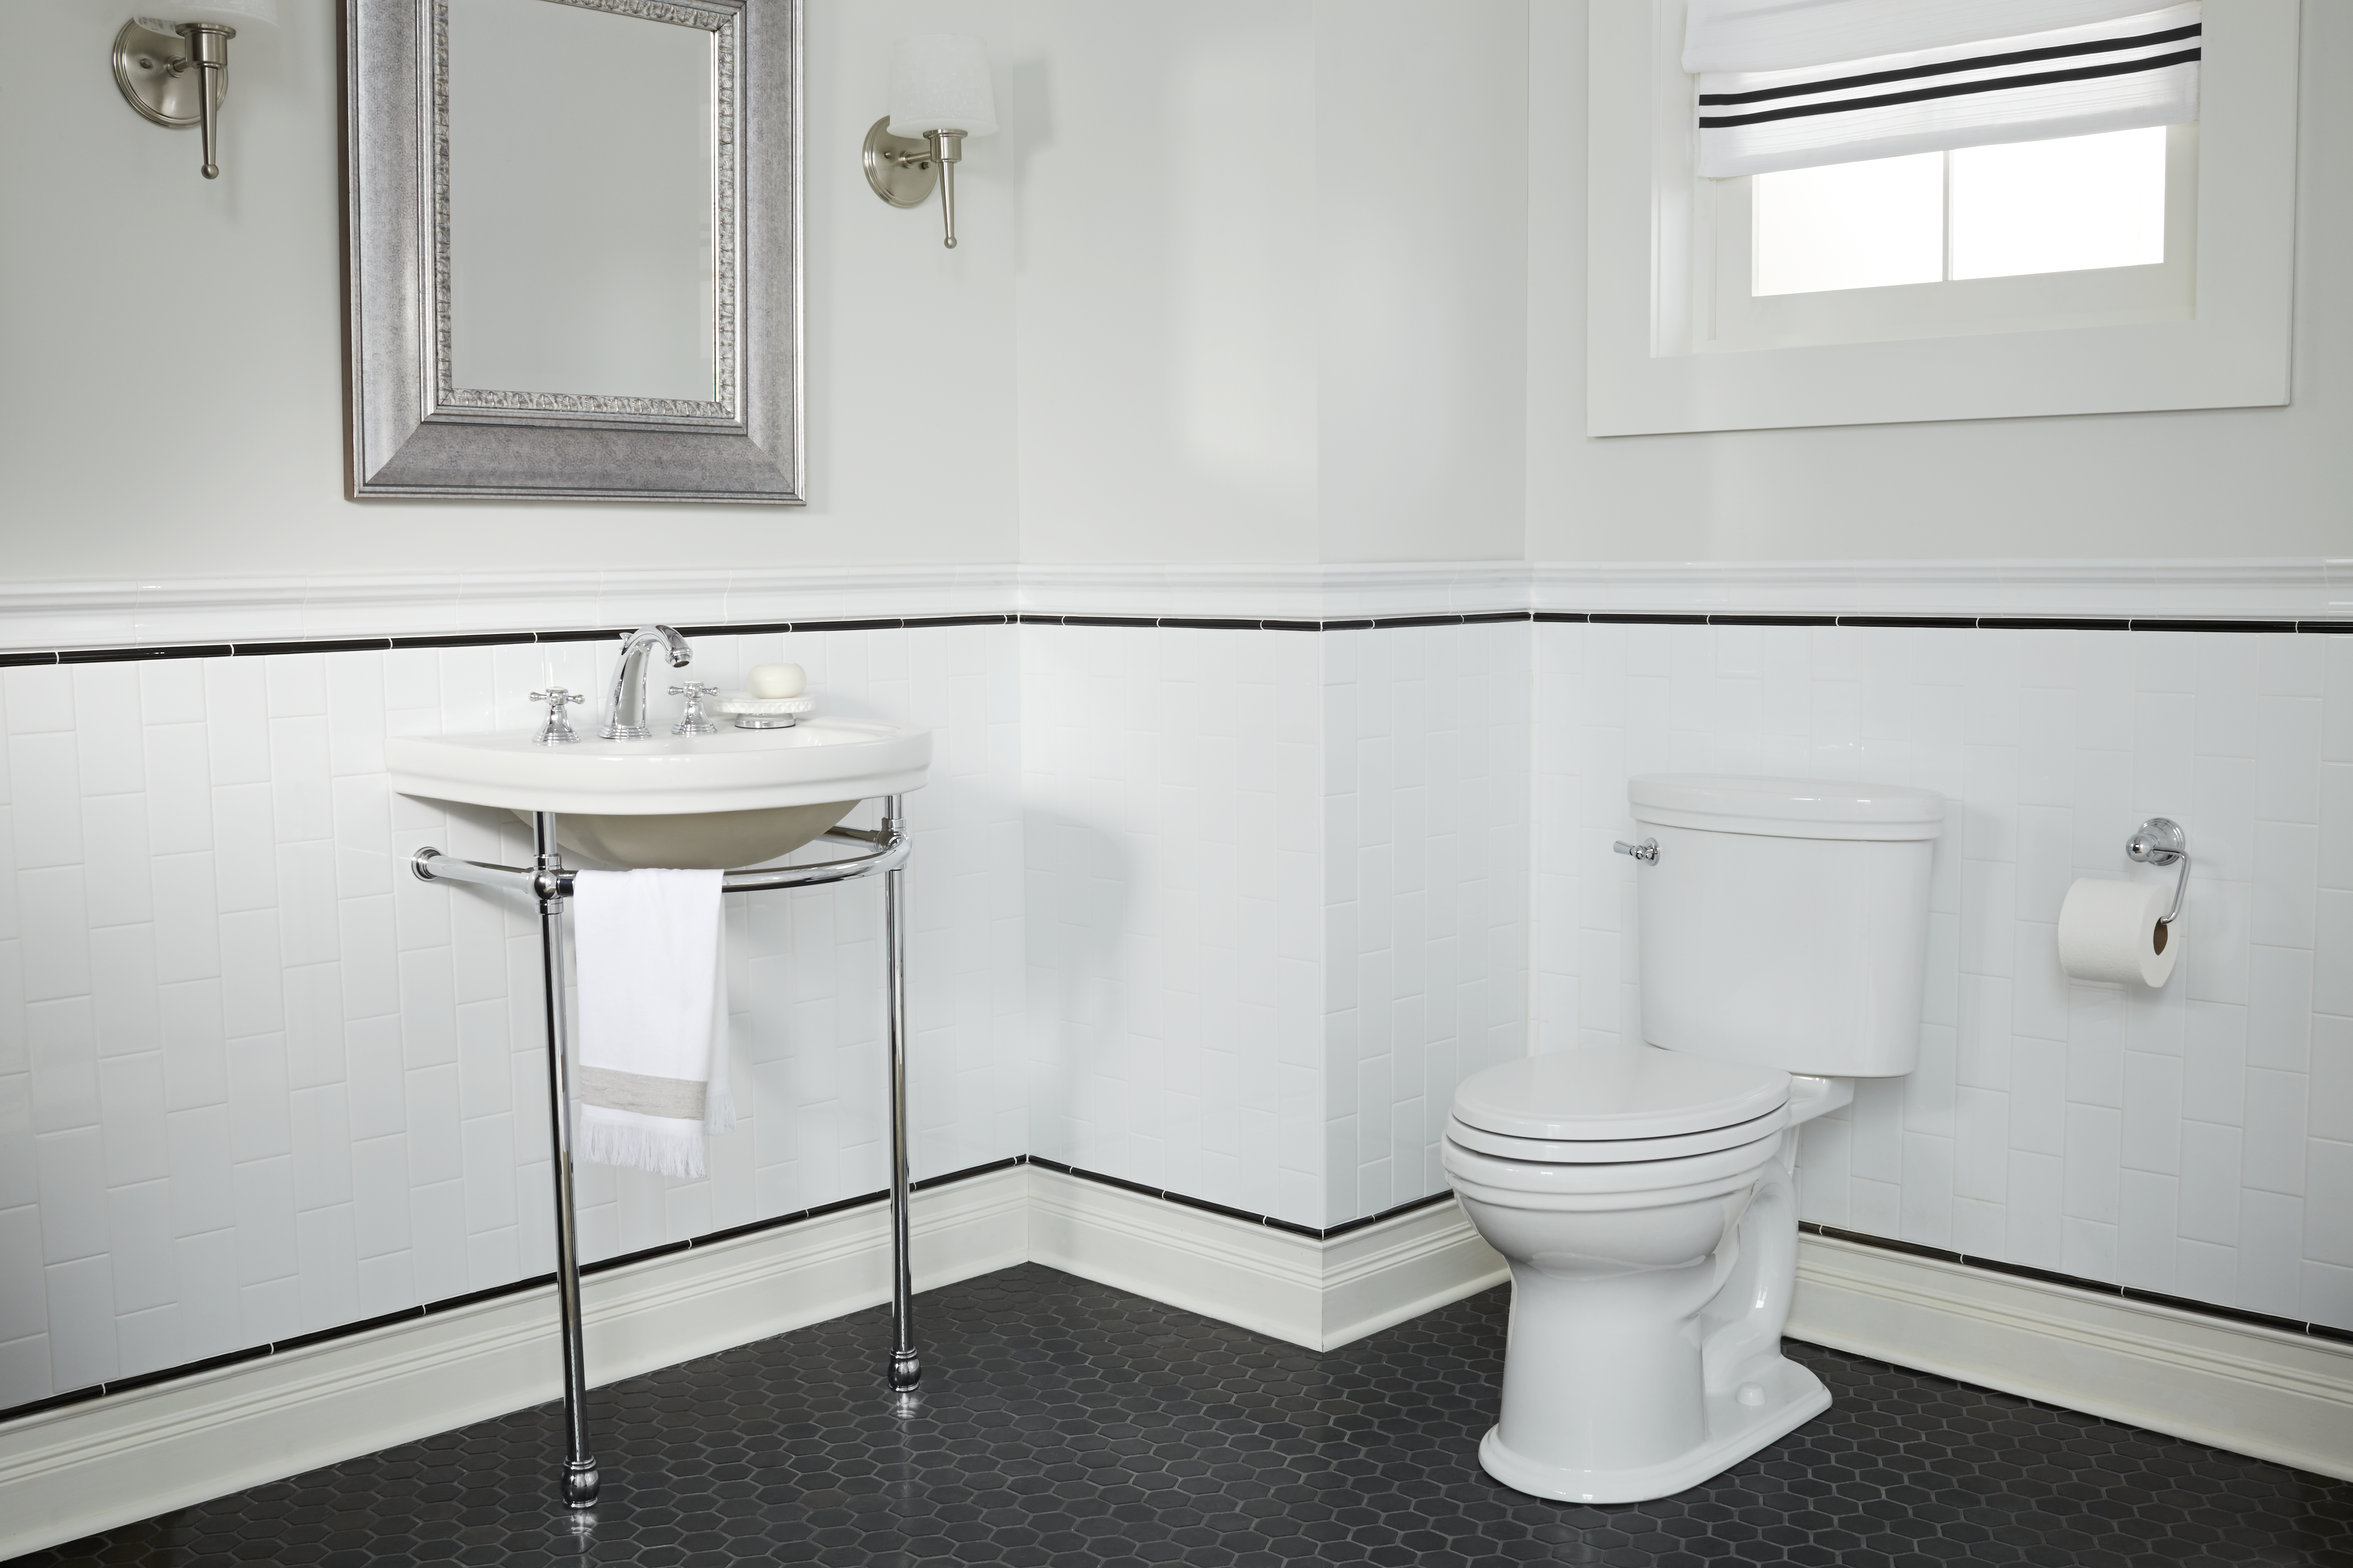 24 in. Console Bathroom Sink, 3 Hole with Console Leg